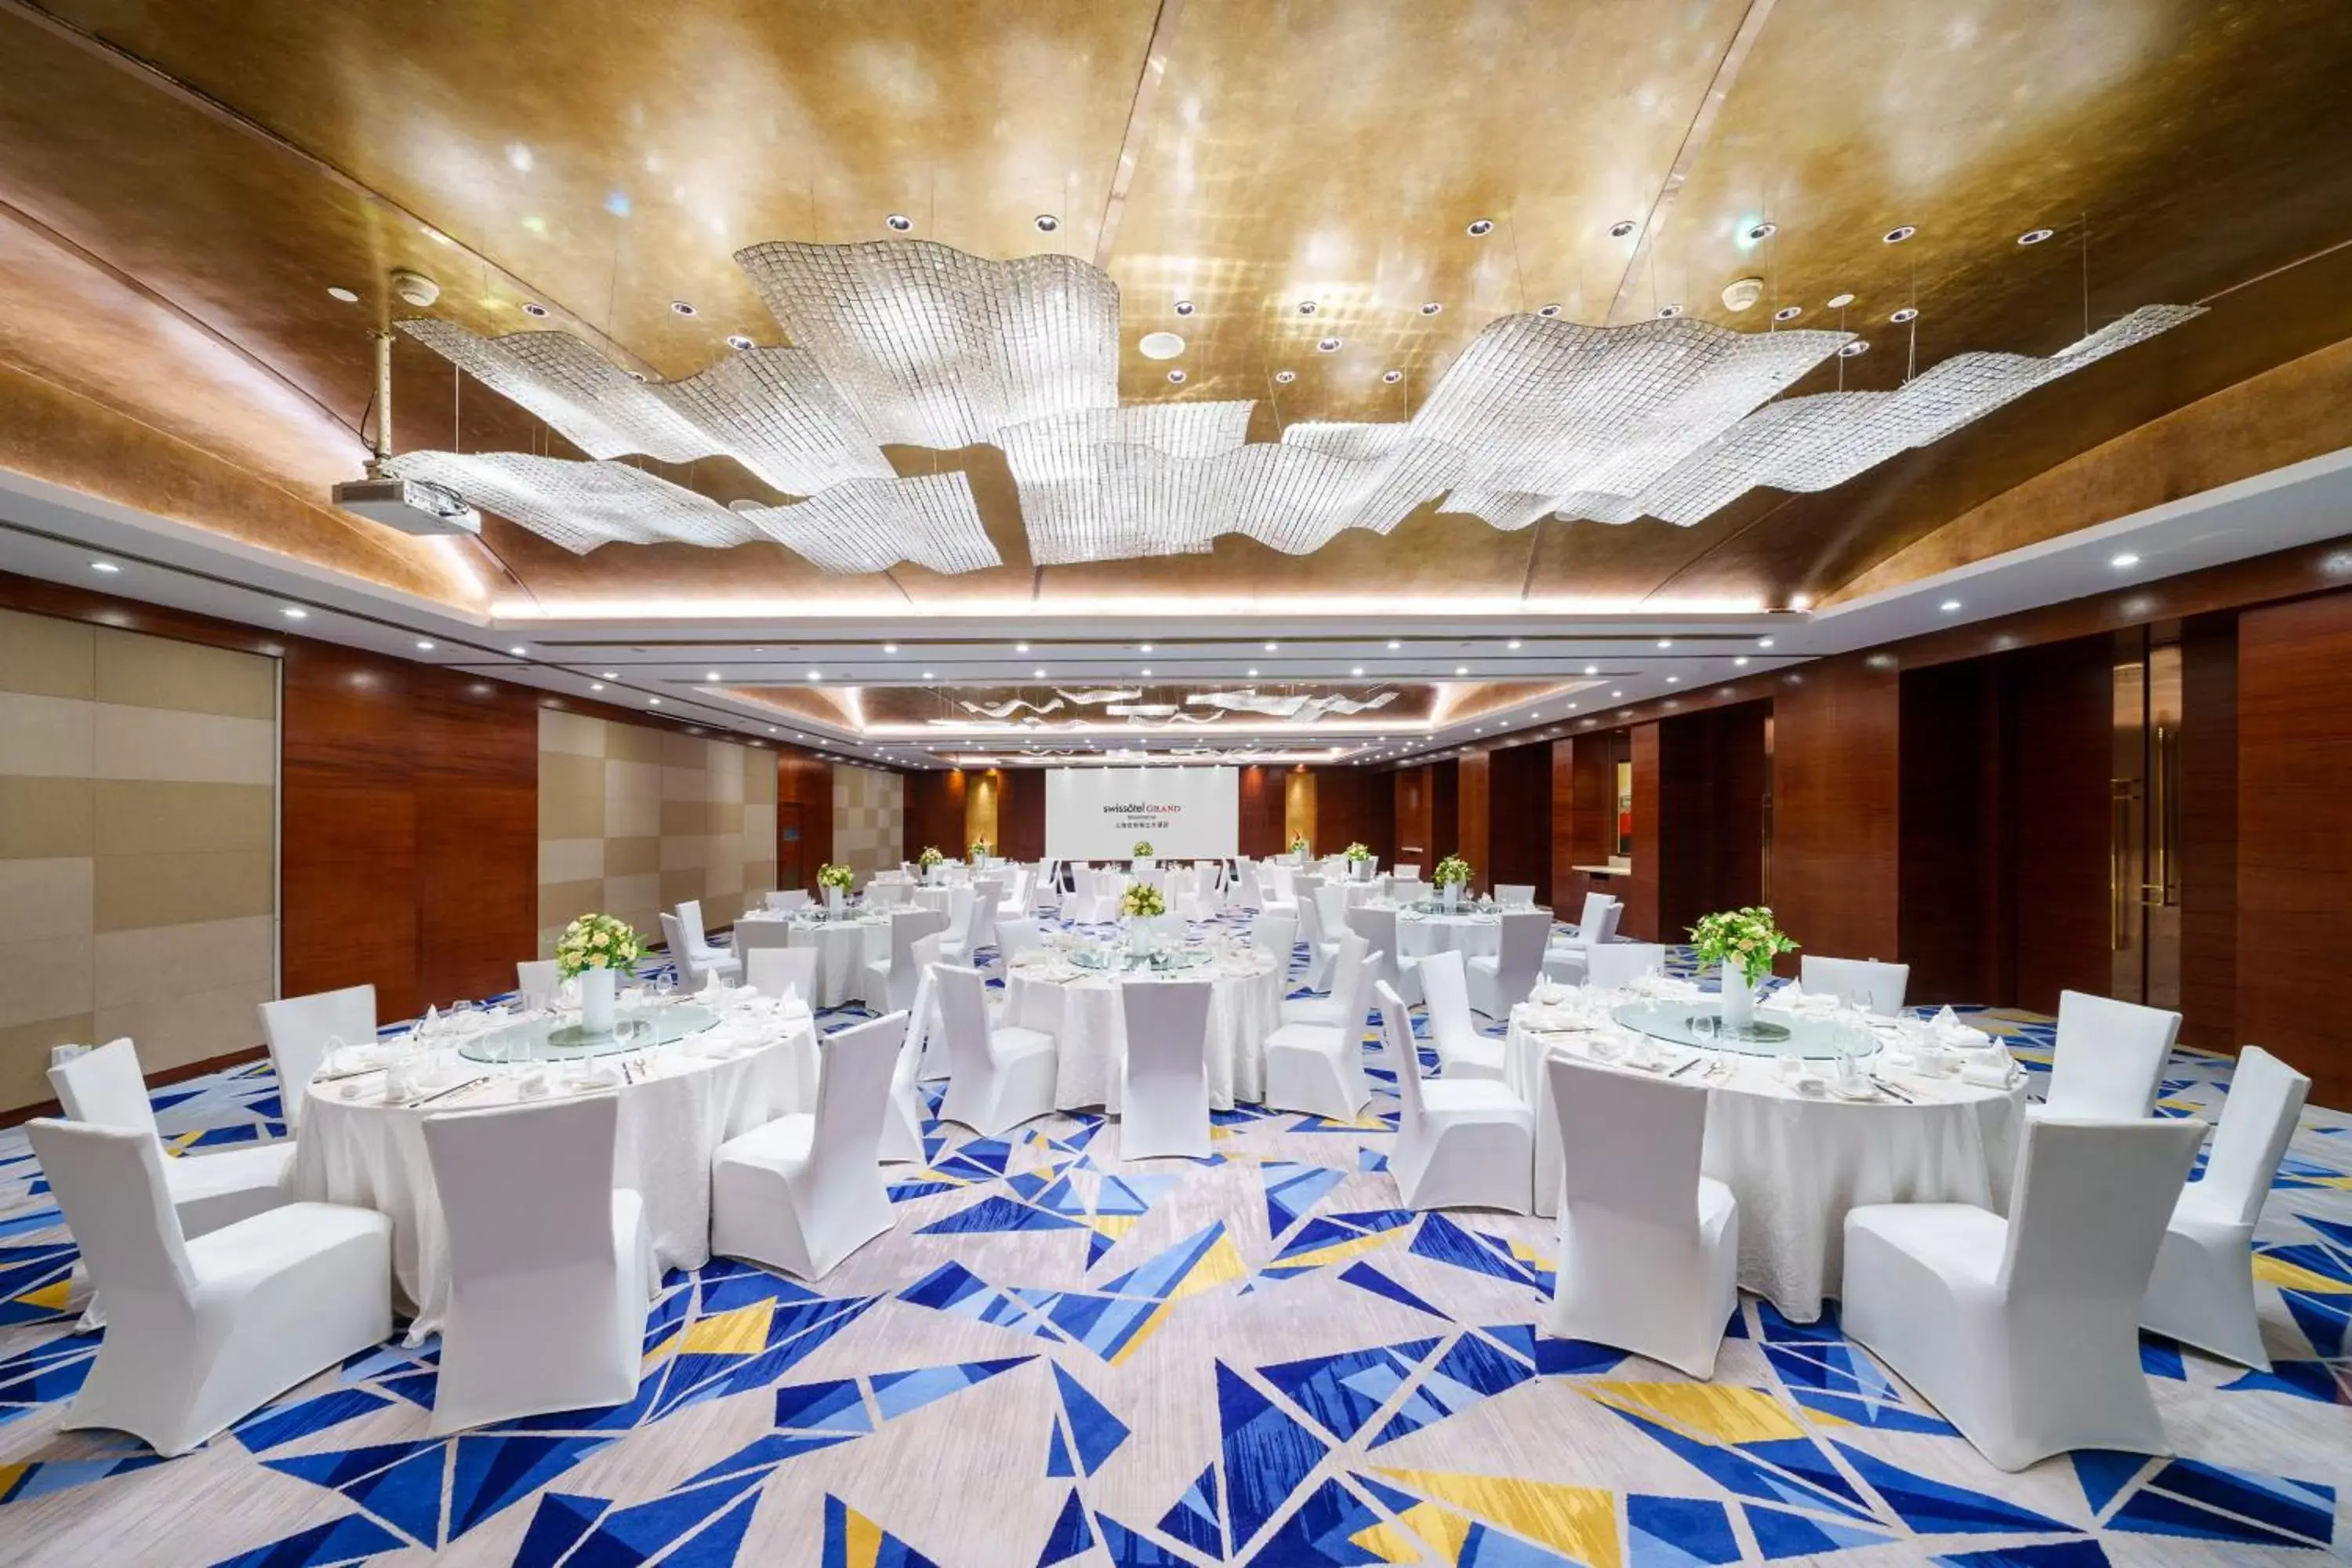 Meeting/conference room, Banquet Facilities in Swissôtel Grand Shanghai